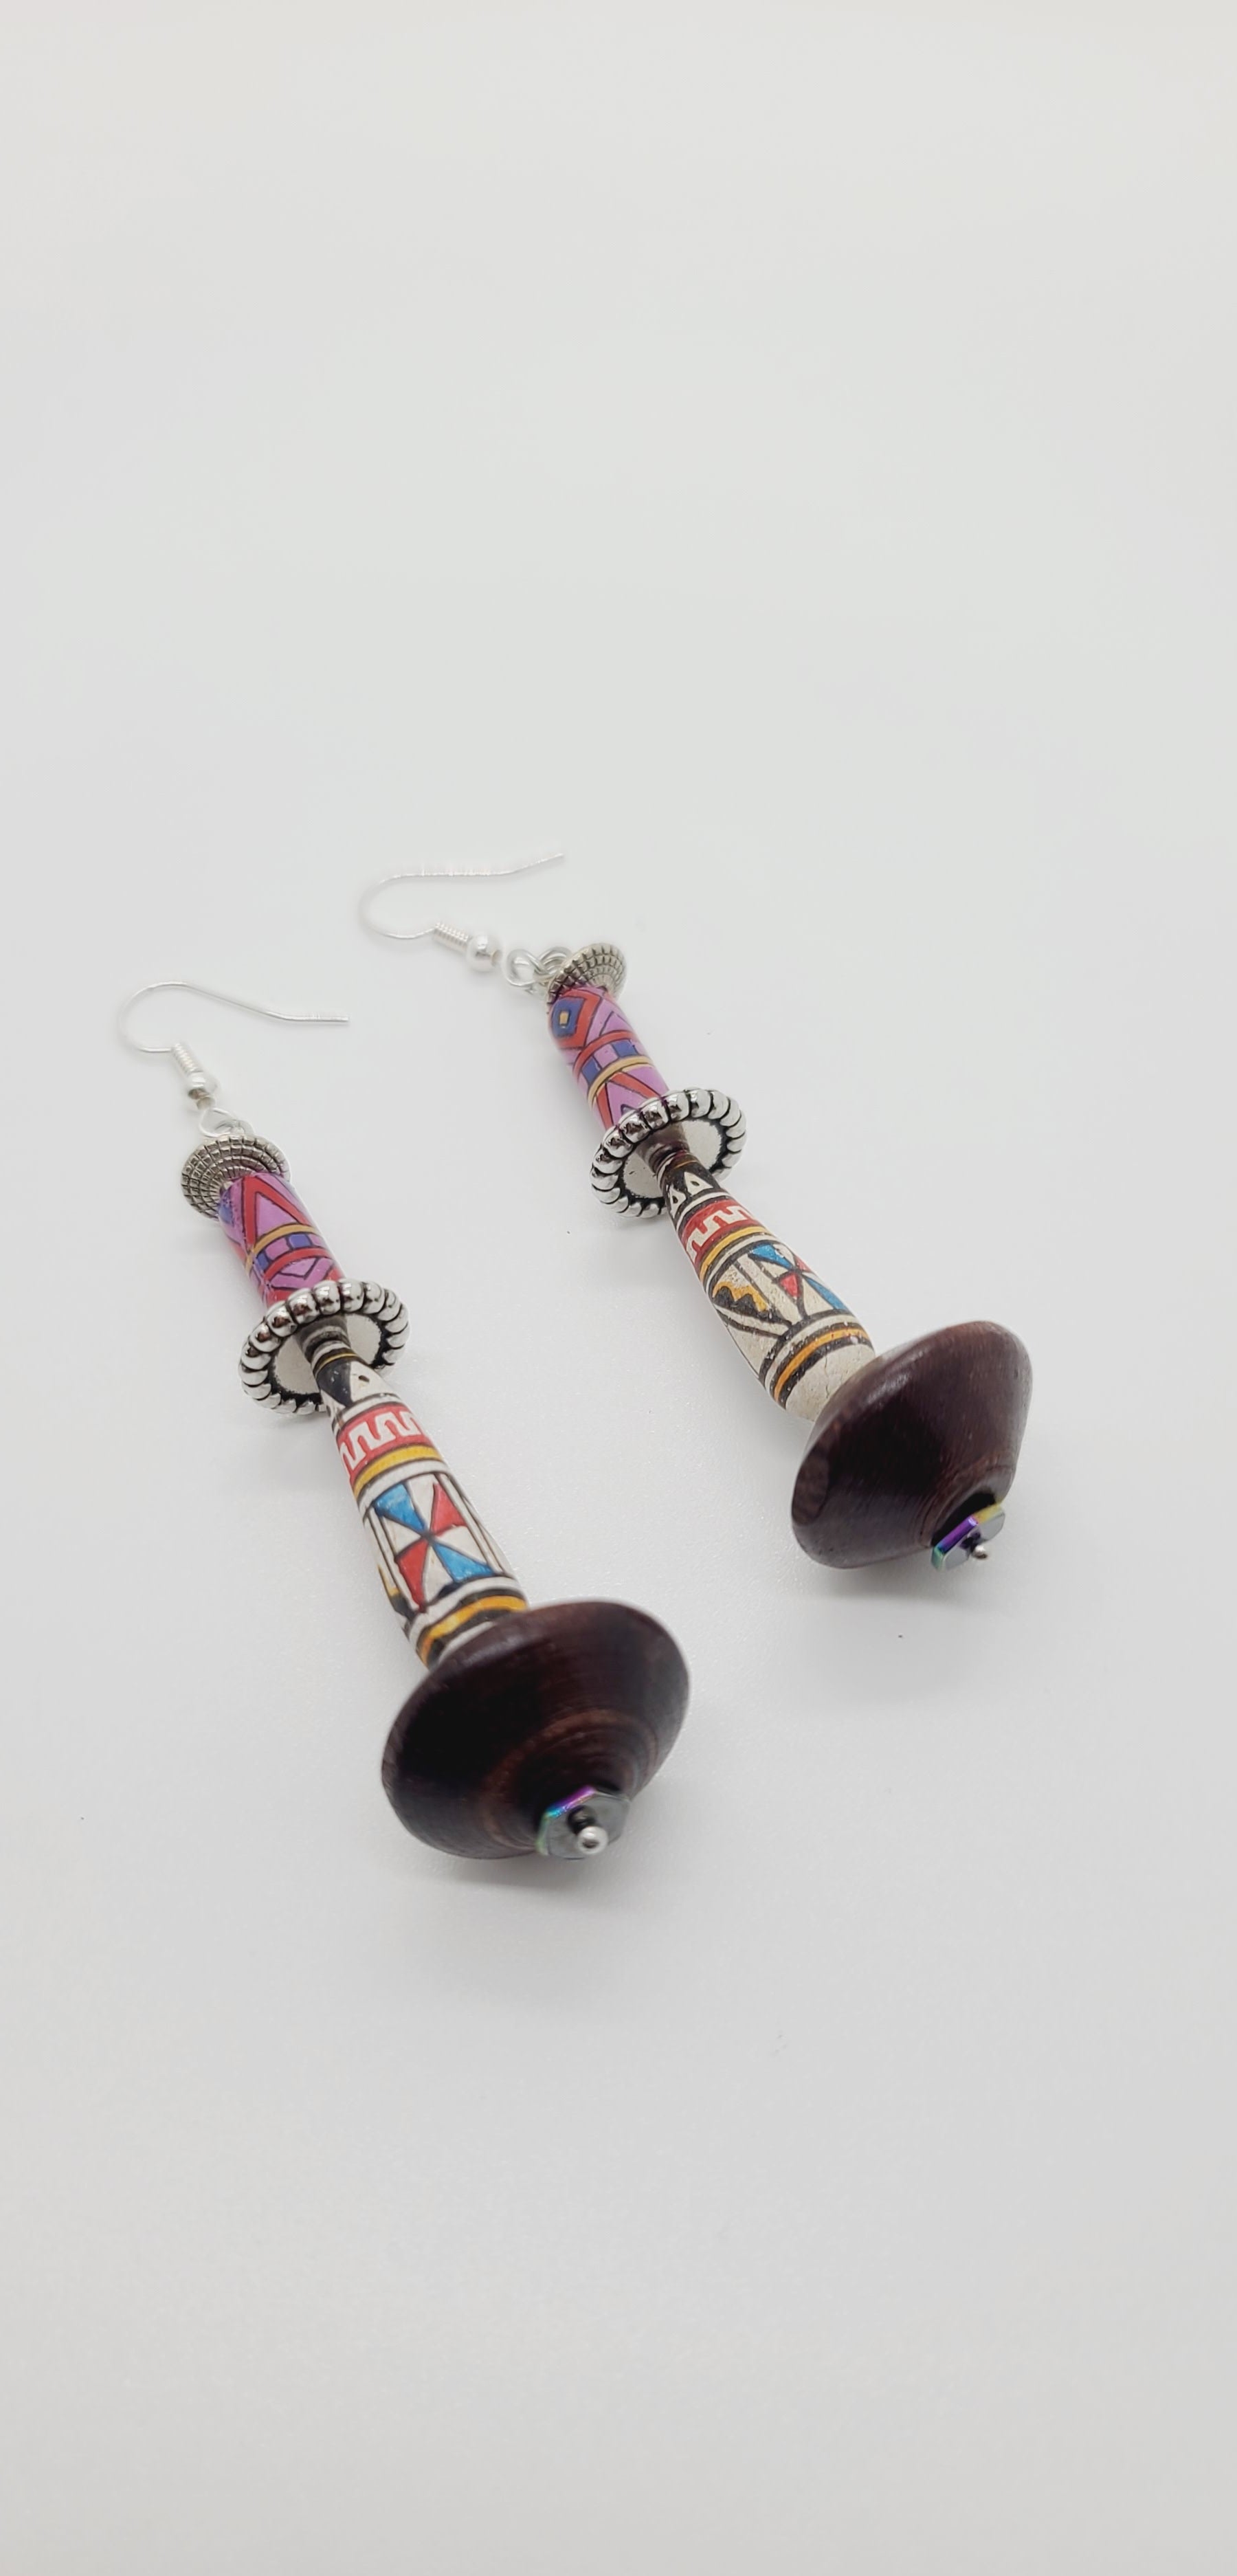 Length: 3 inches | Weight: 0.5 ounces  Distinctly You! These earrings are made with brown wooden Bicone beads, ethnic print beads, accented with silver rondelles.